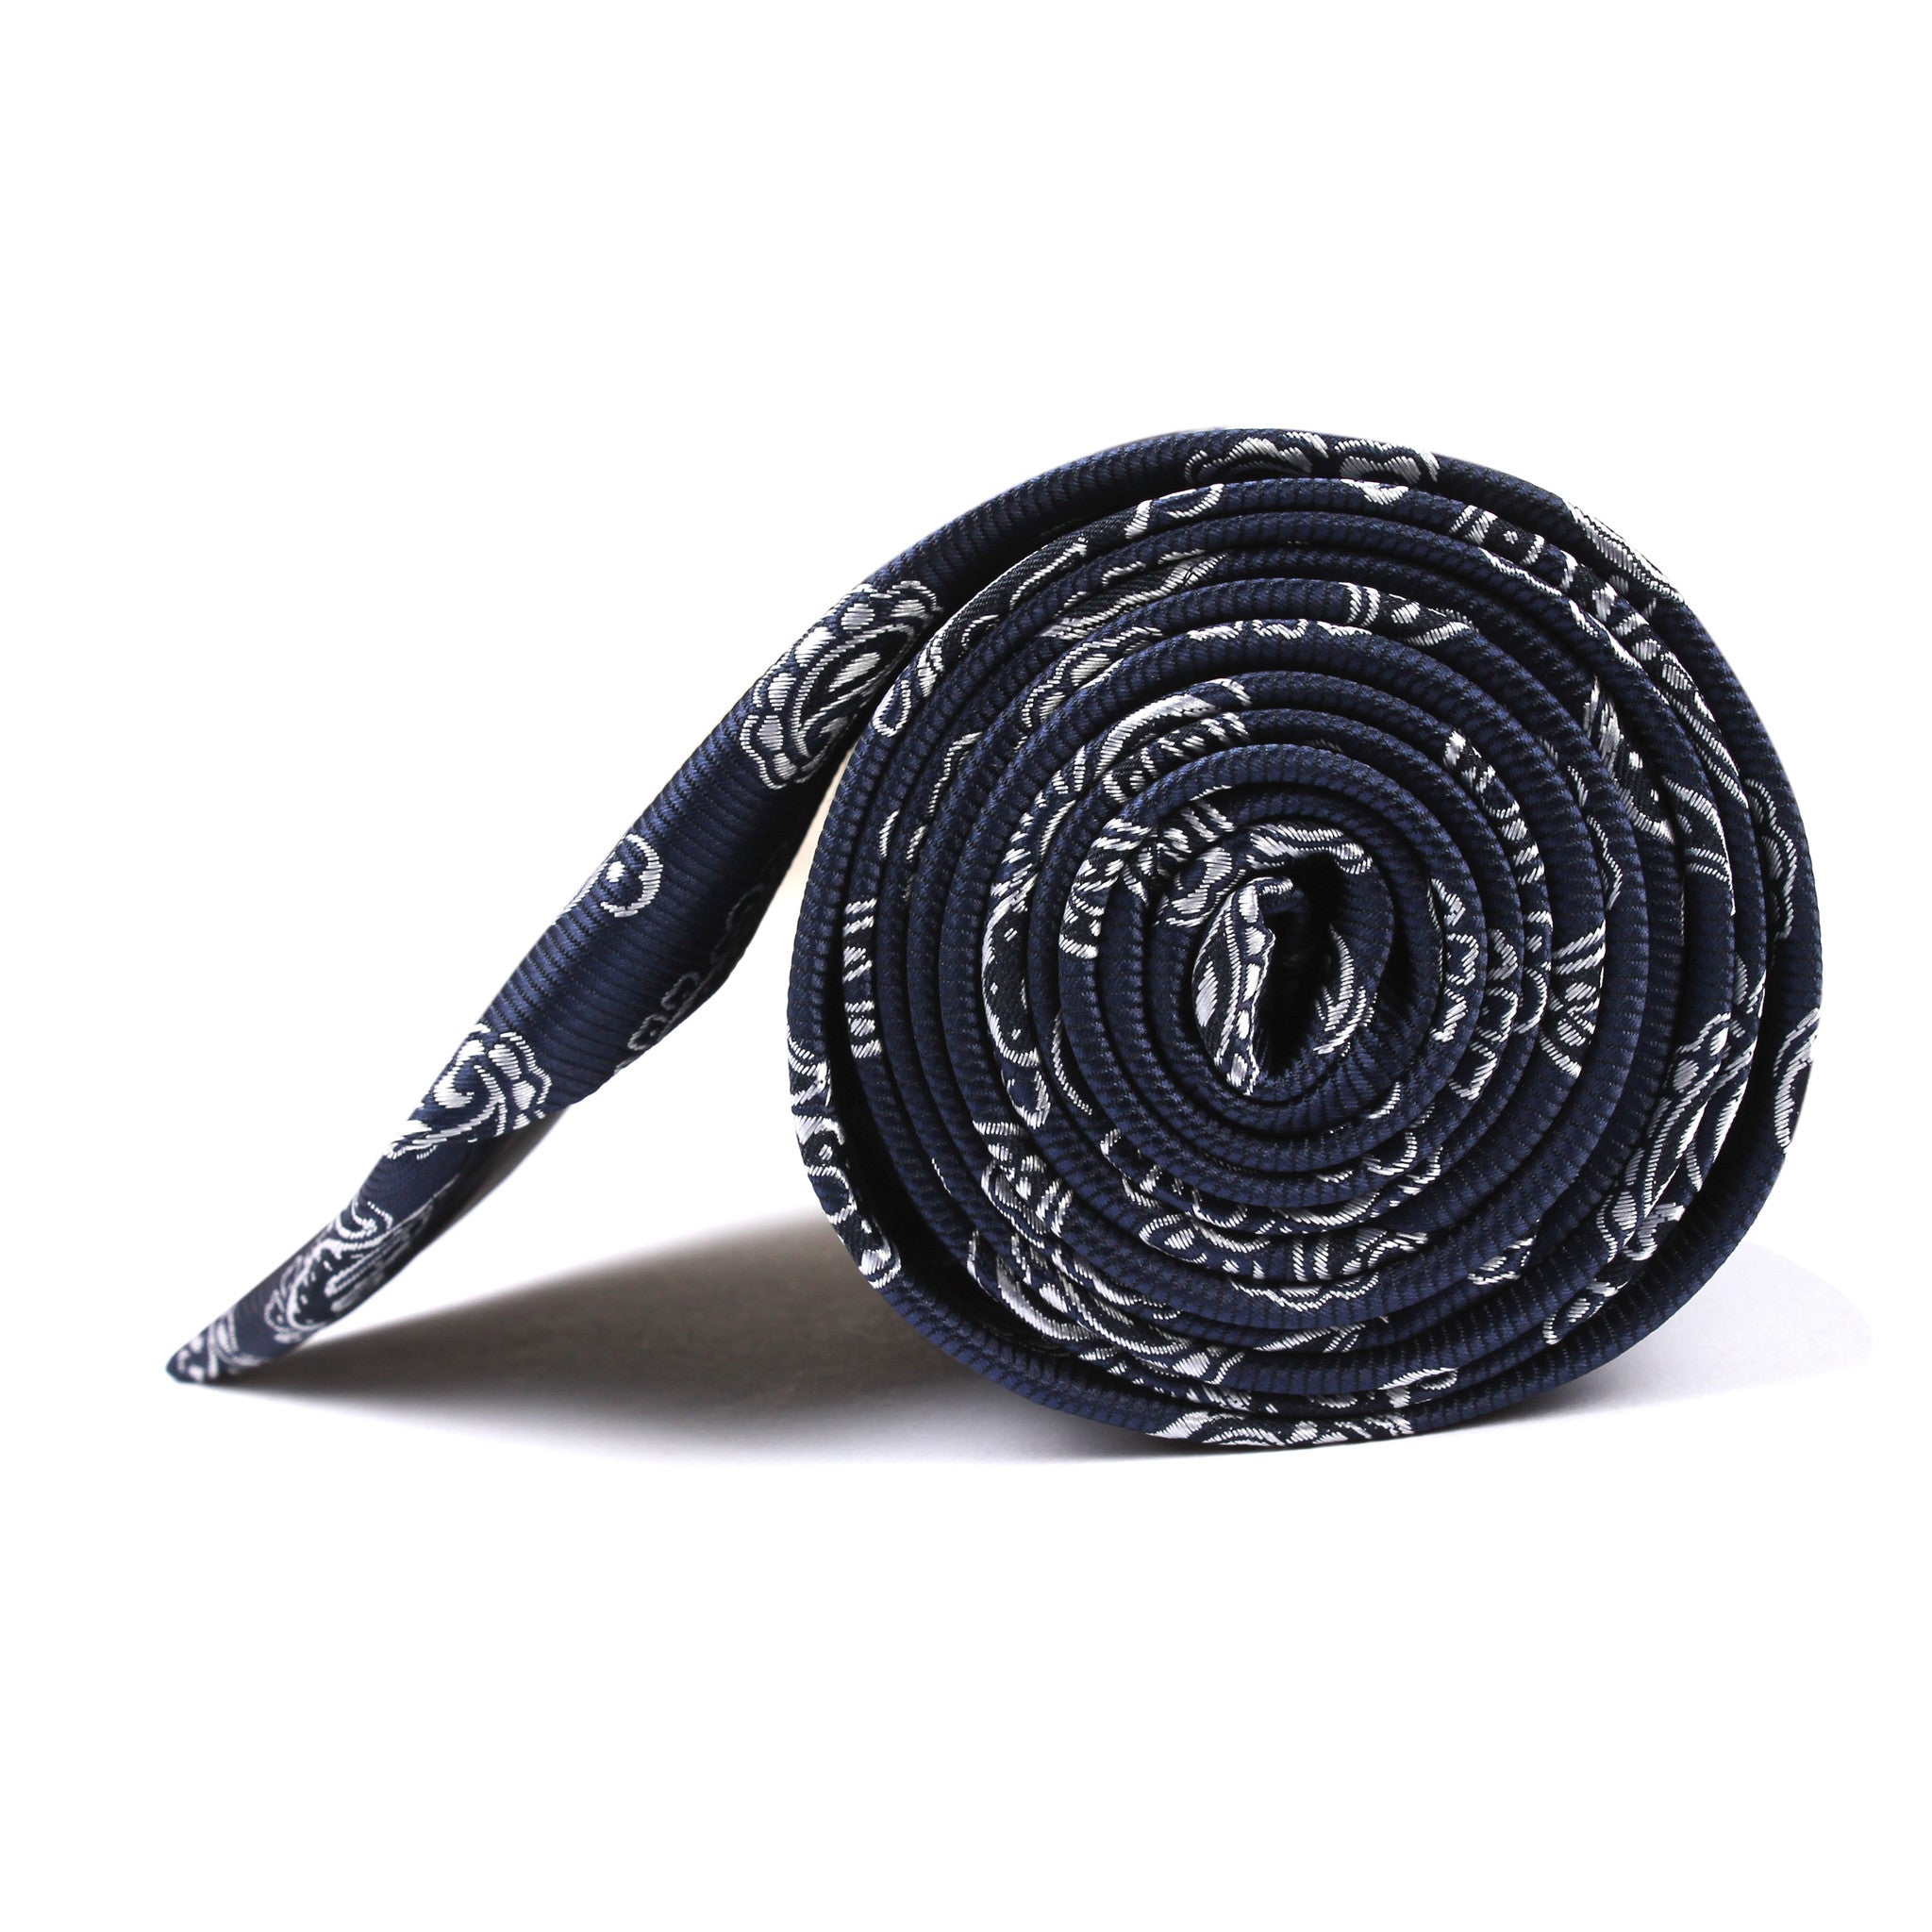 Paisley Navy Blue Tie Side View